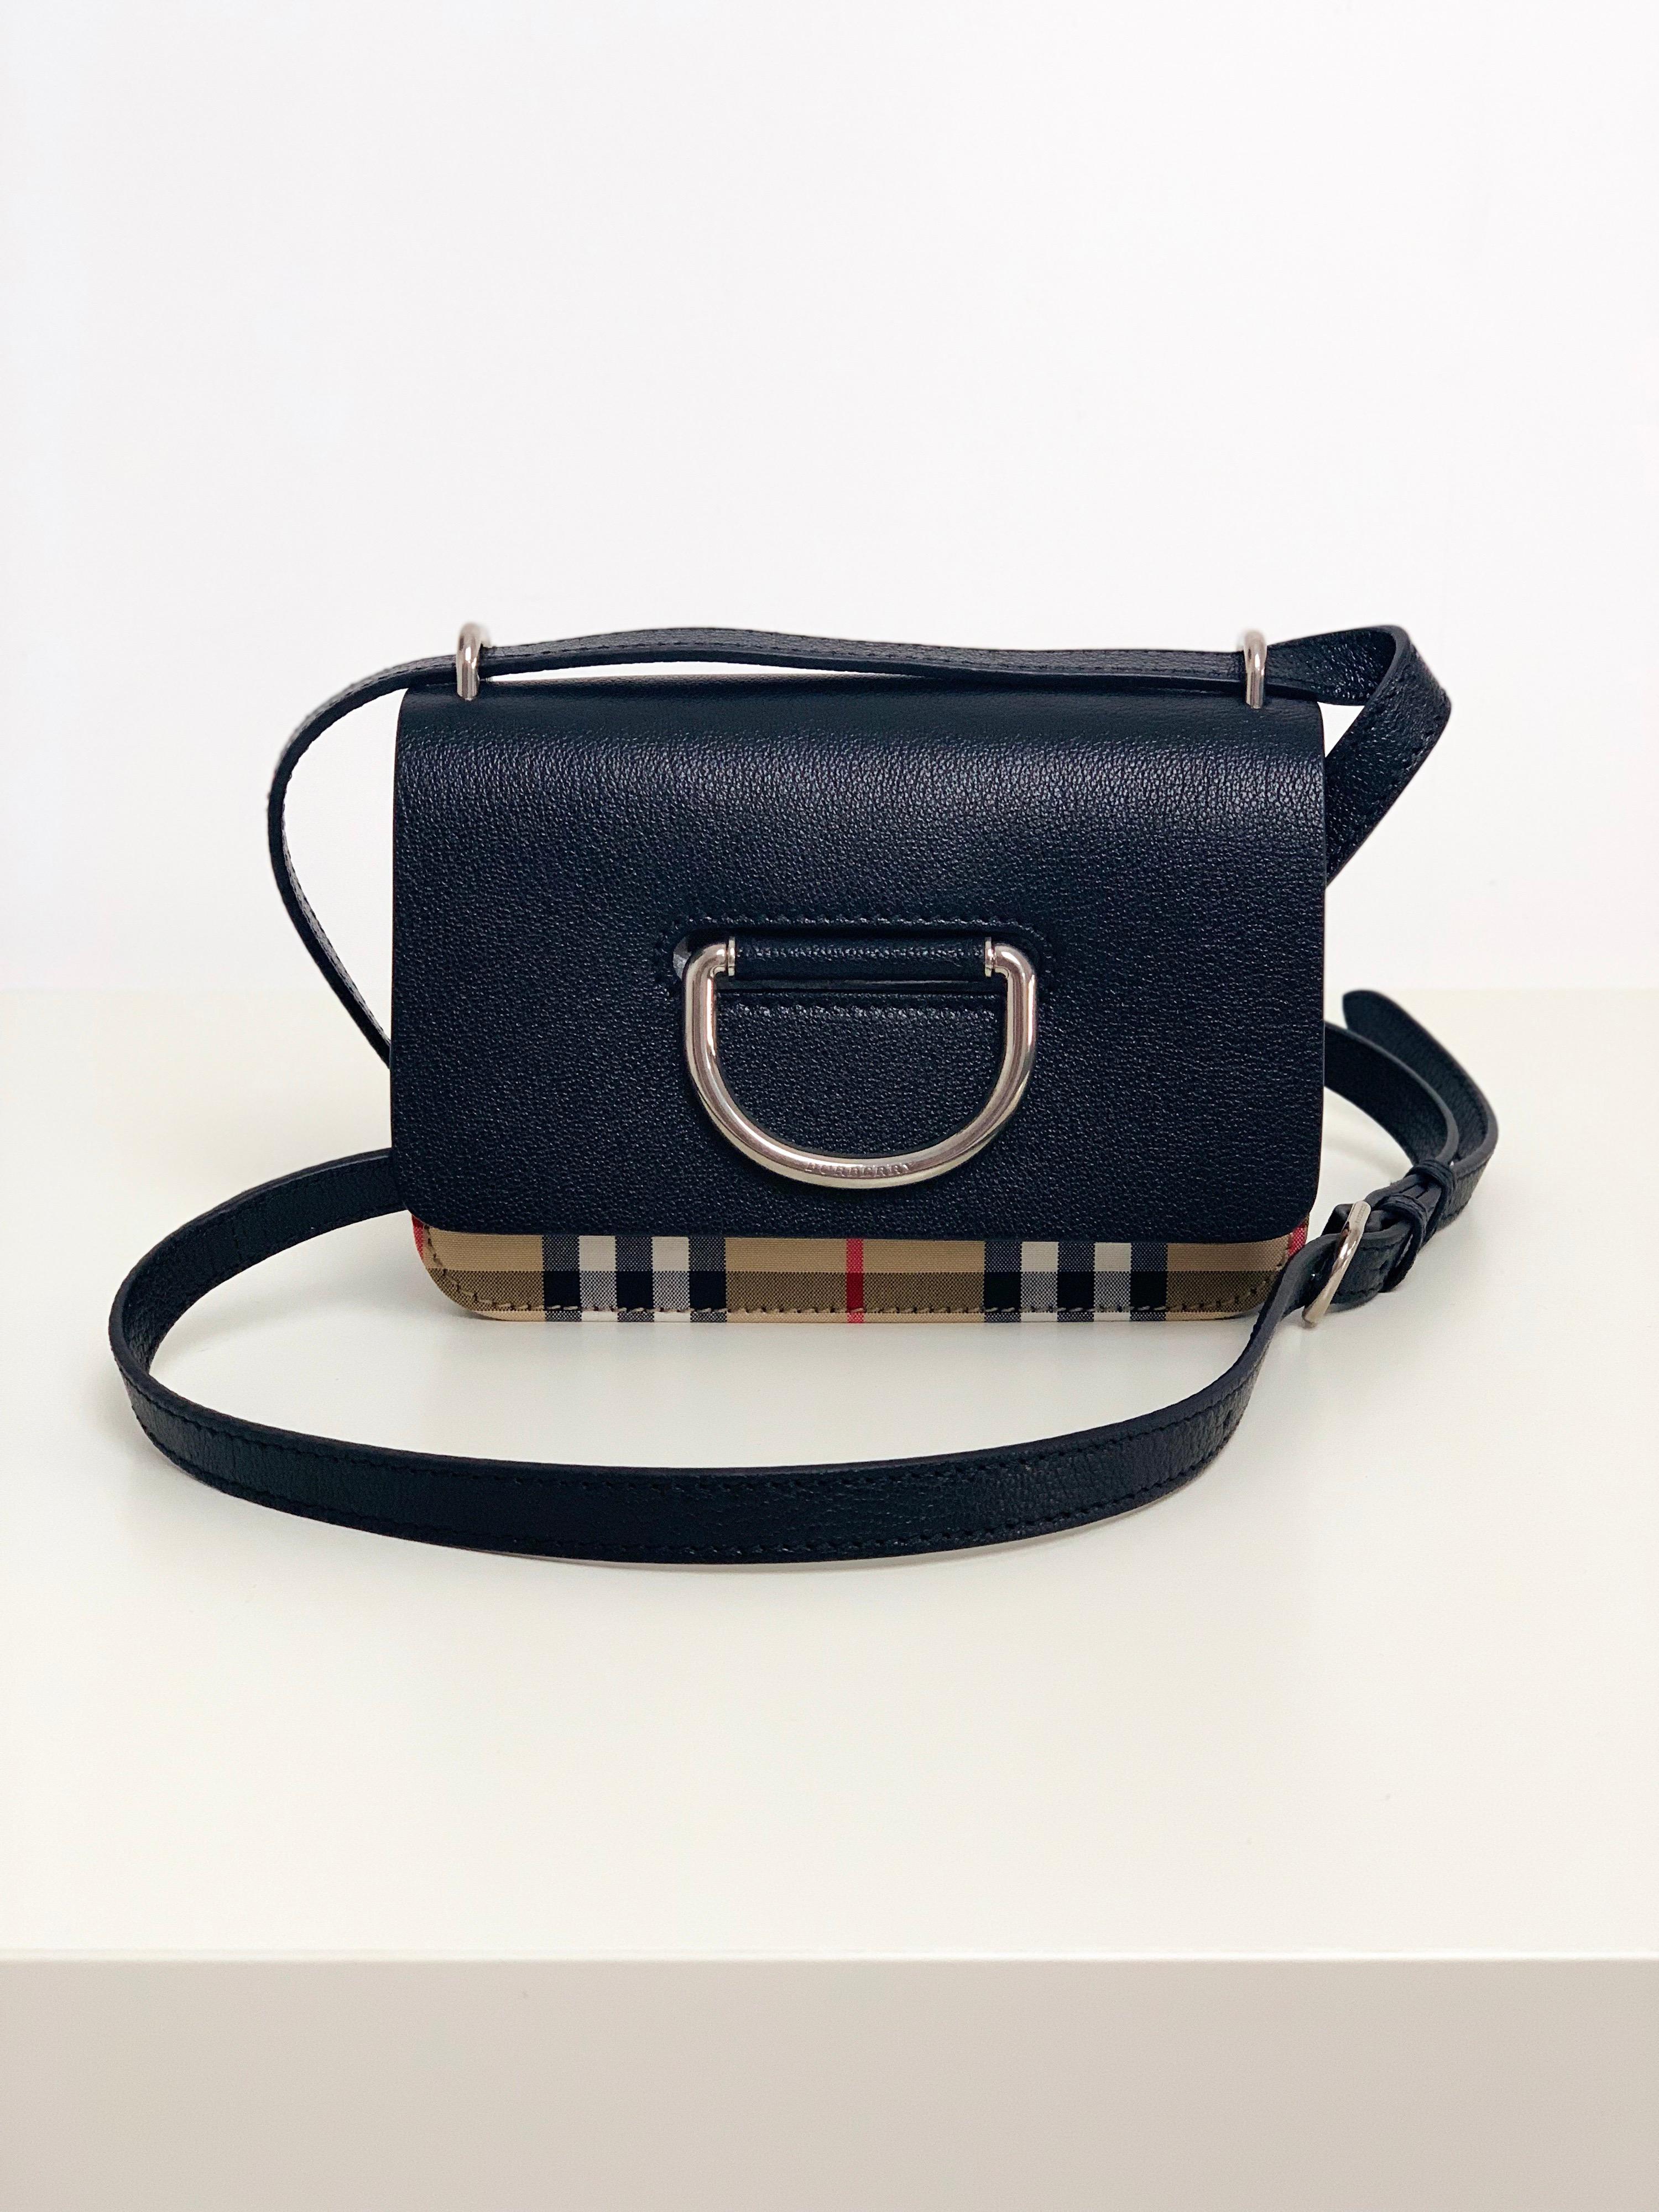 A sleek box-style bag in Vintage check and grainy leather with a distinctive D-ring fastening inspired by our signature trench. Wear it on the shoulder or adjust the strap to style as a crossbody.

17.5 x 4 x 12.5cm/6.9 x 1.6 x 4.9in
Min. strap